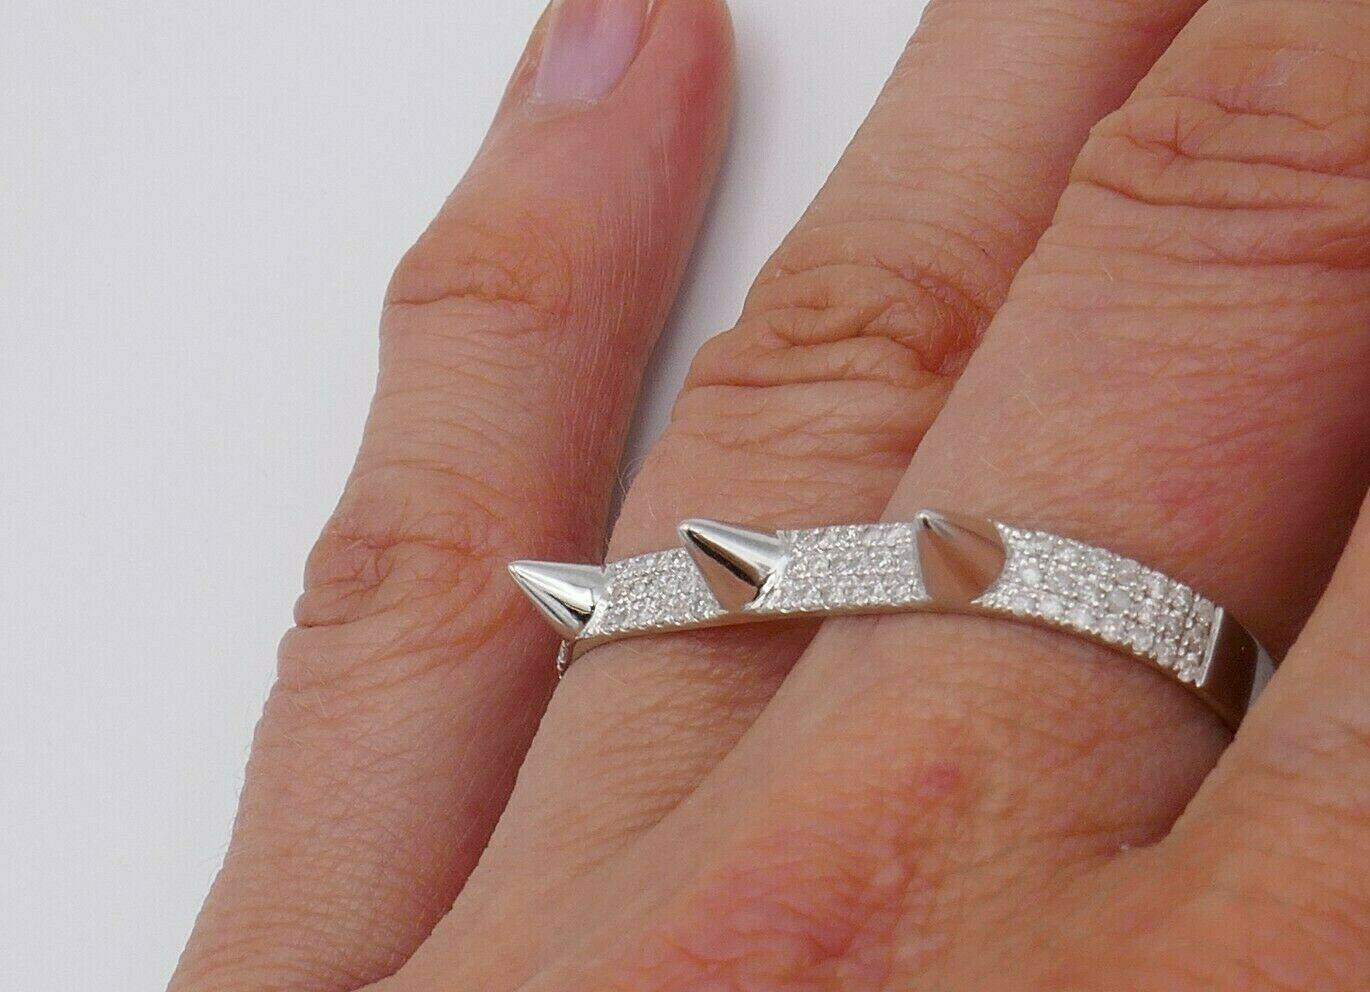 Modern 18k white gold Spike two-finger ring by Elise Dray. Featuring 0.43 points of round brilliant cut diamonds.  Stamped with  Elise Dray maker's marks and a hallmark for 18k gold. 
Measurements: rings sizes are 5.75 and 6.75. Band width is 0.15